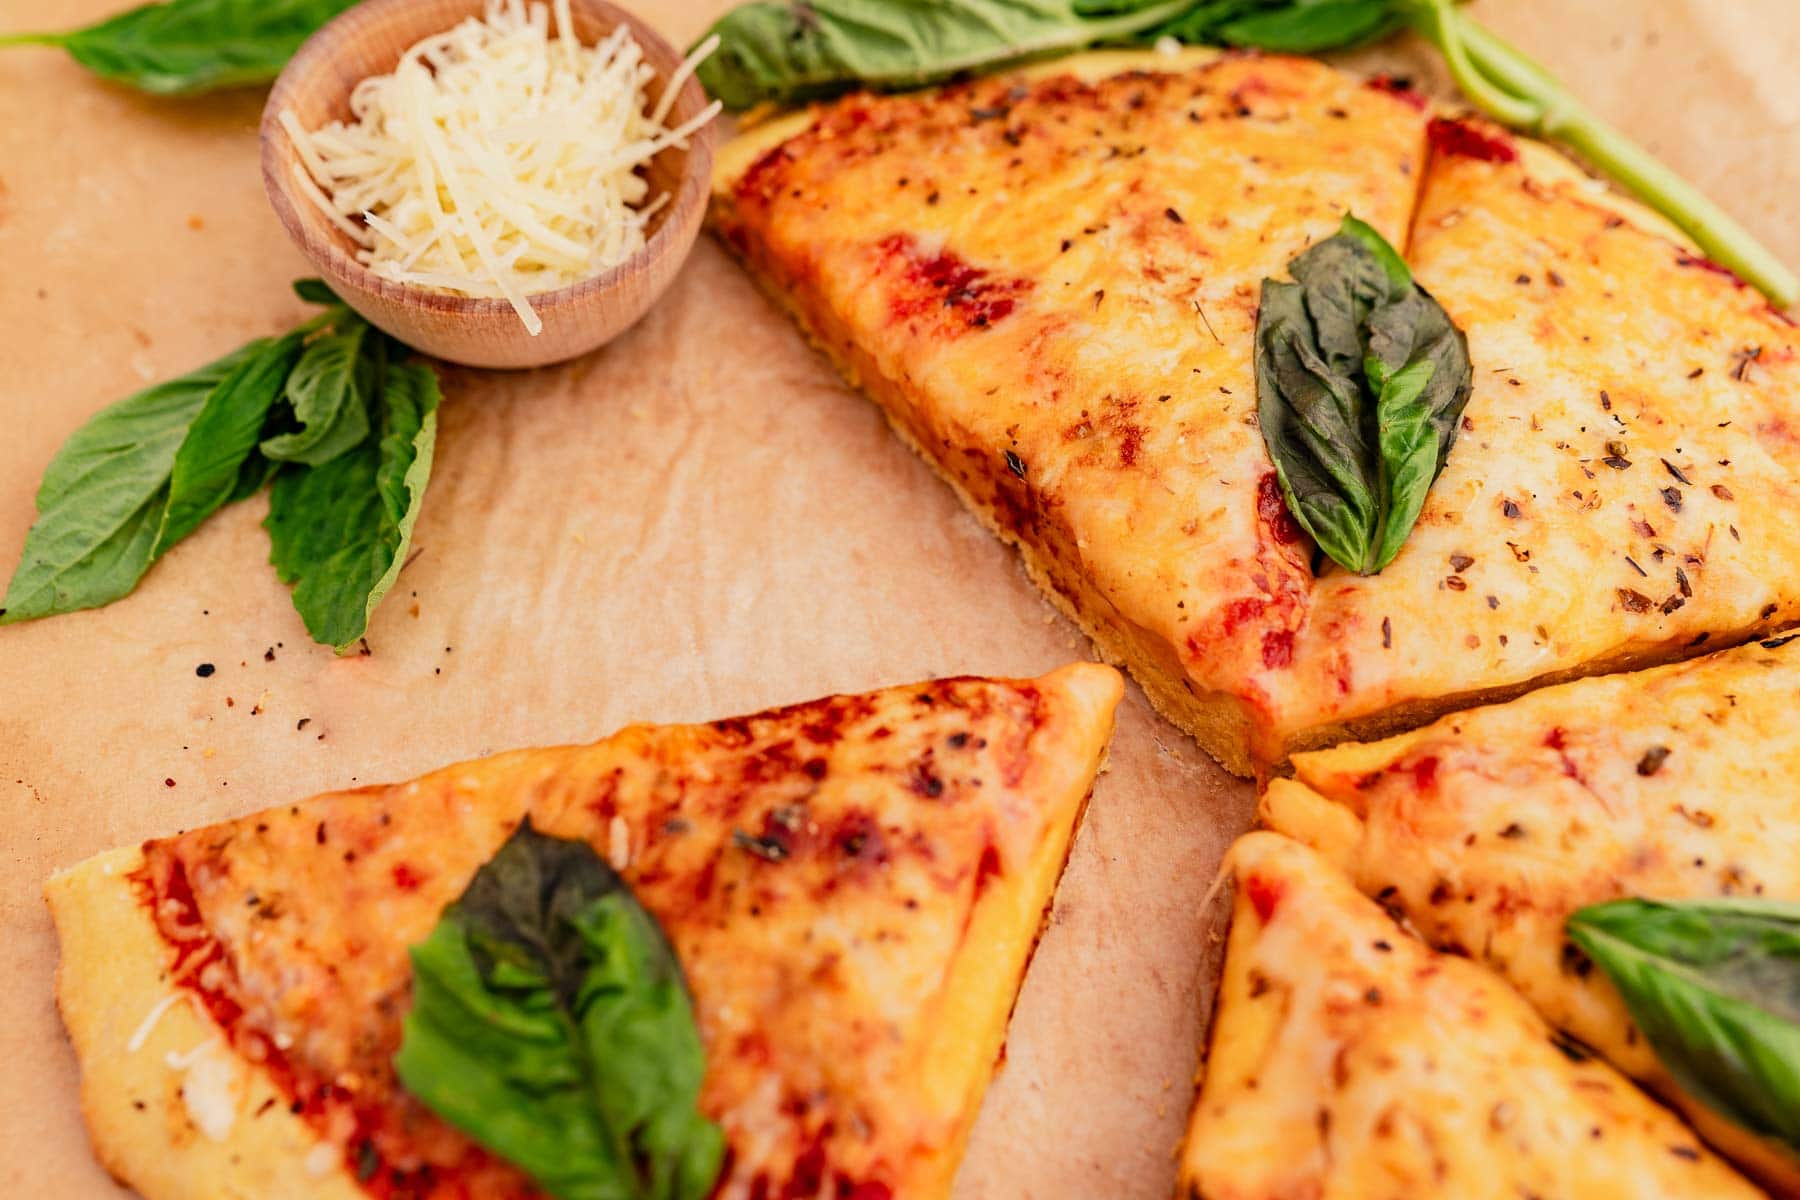 Slices of cheese pizza with chickpea flour crust, fresh basil leaves, and a small bowl of grated cheese on a brown surface.